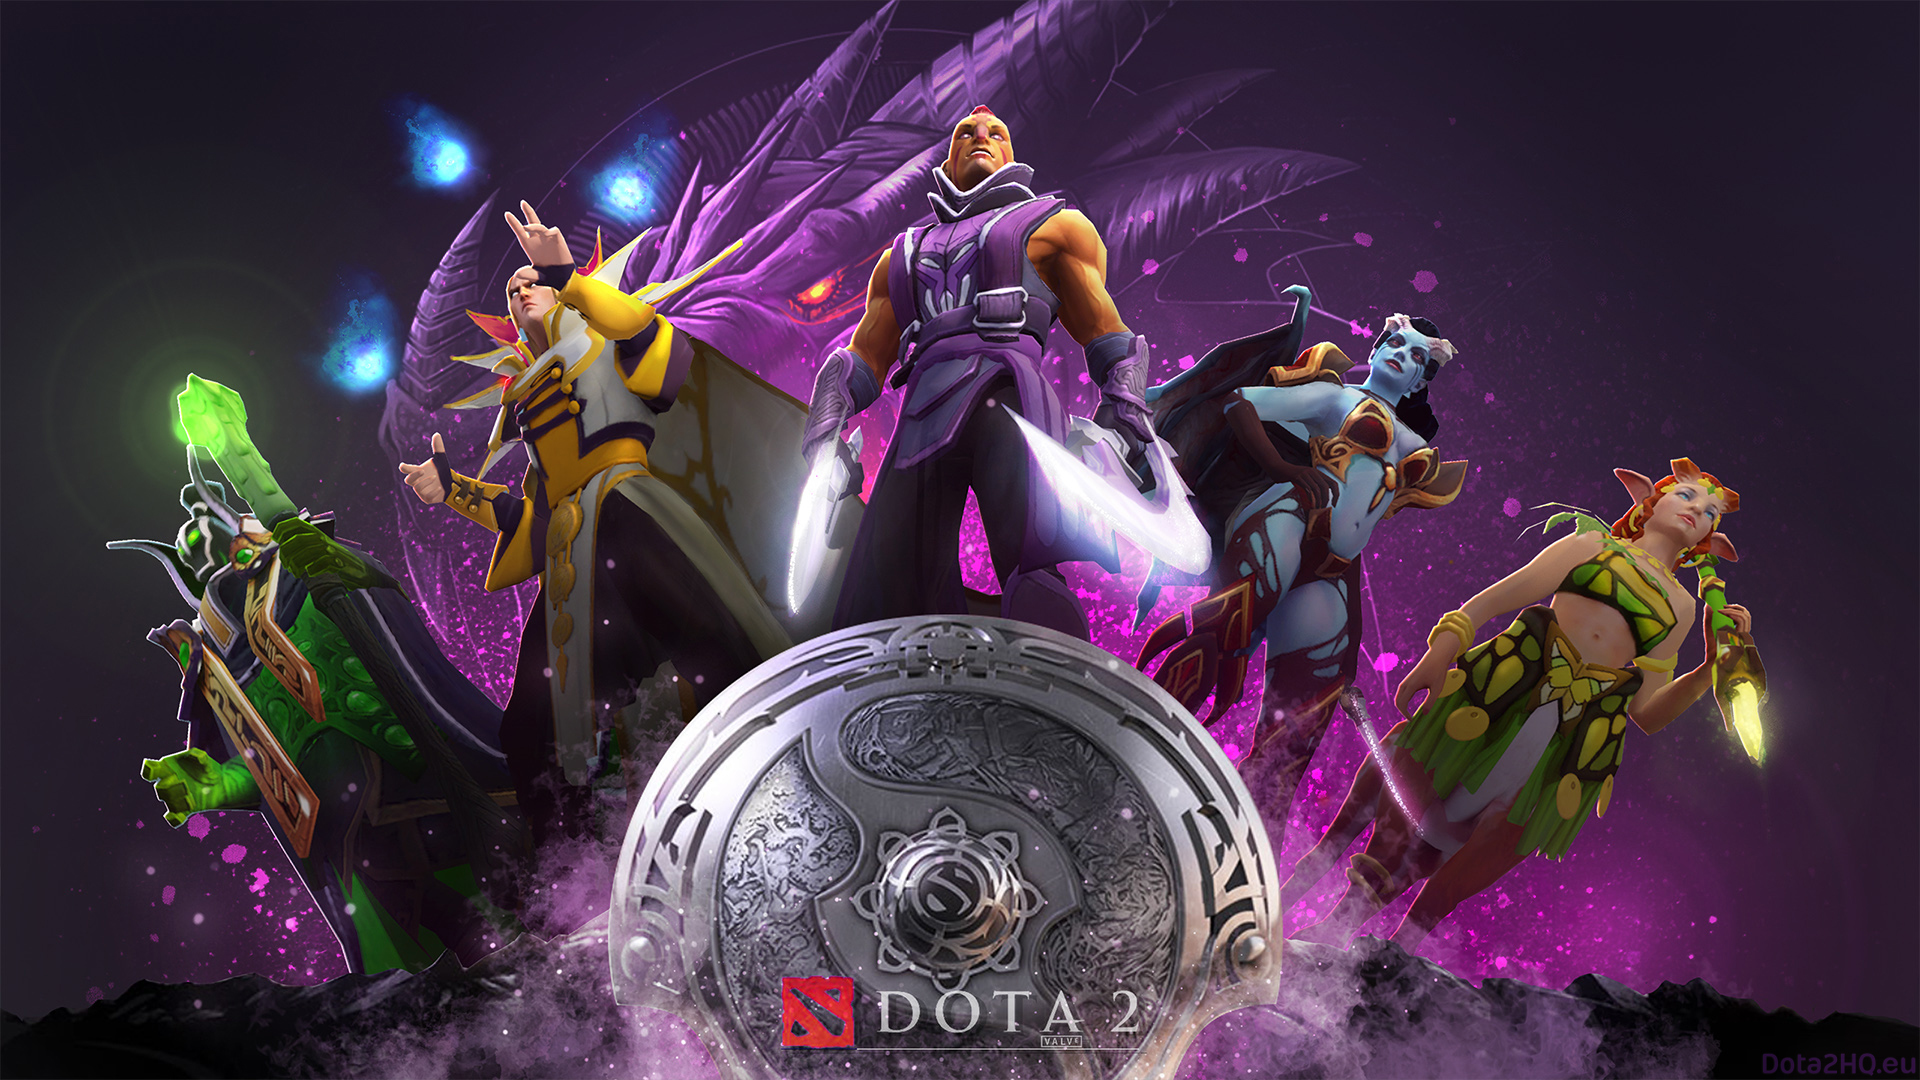 Dota 2 is free or not фото 110